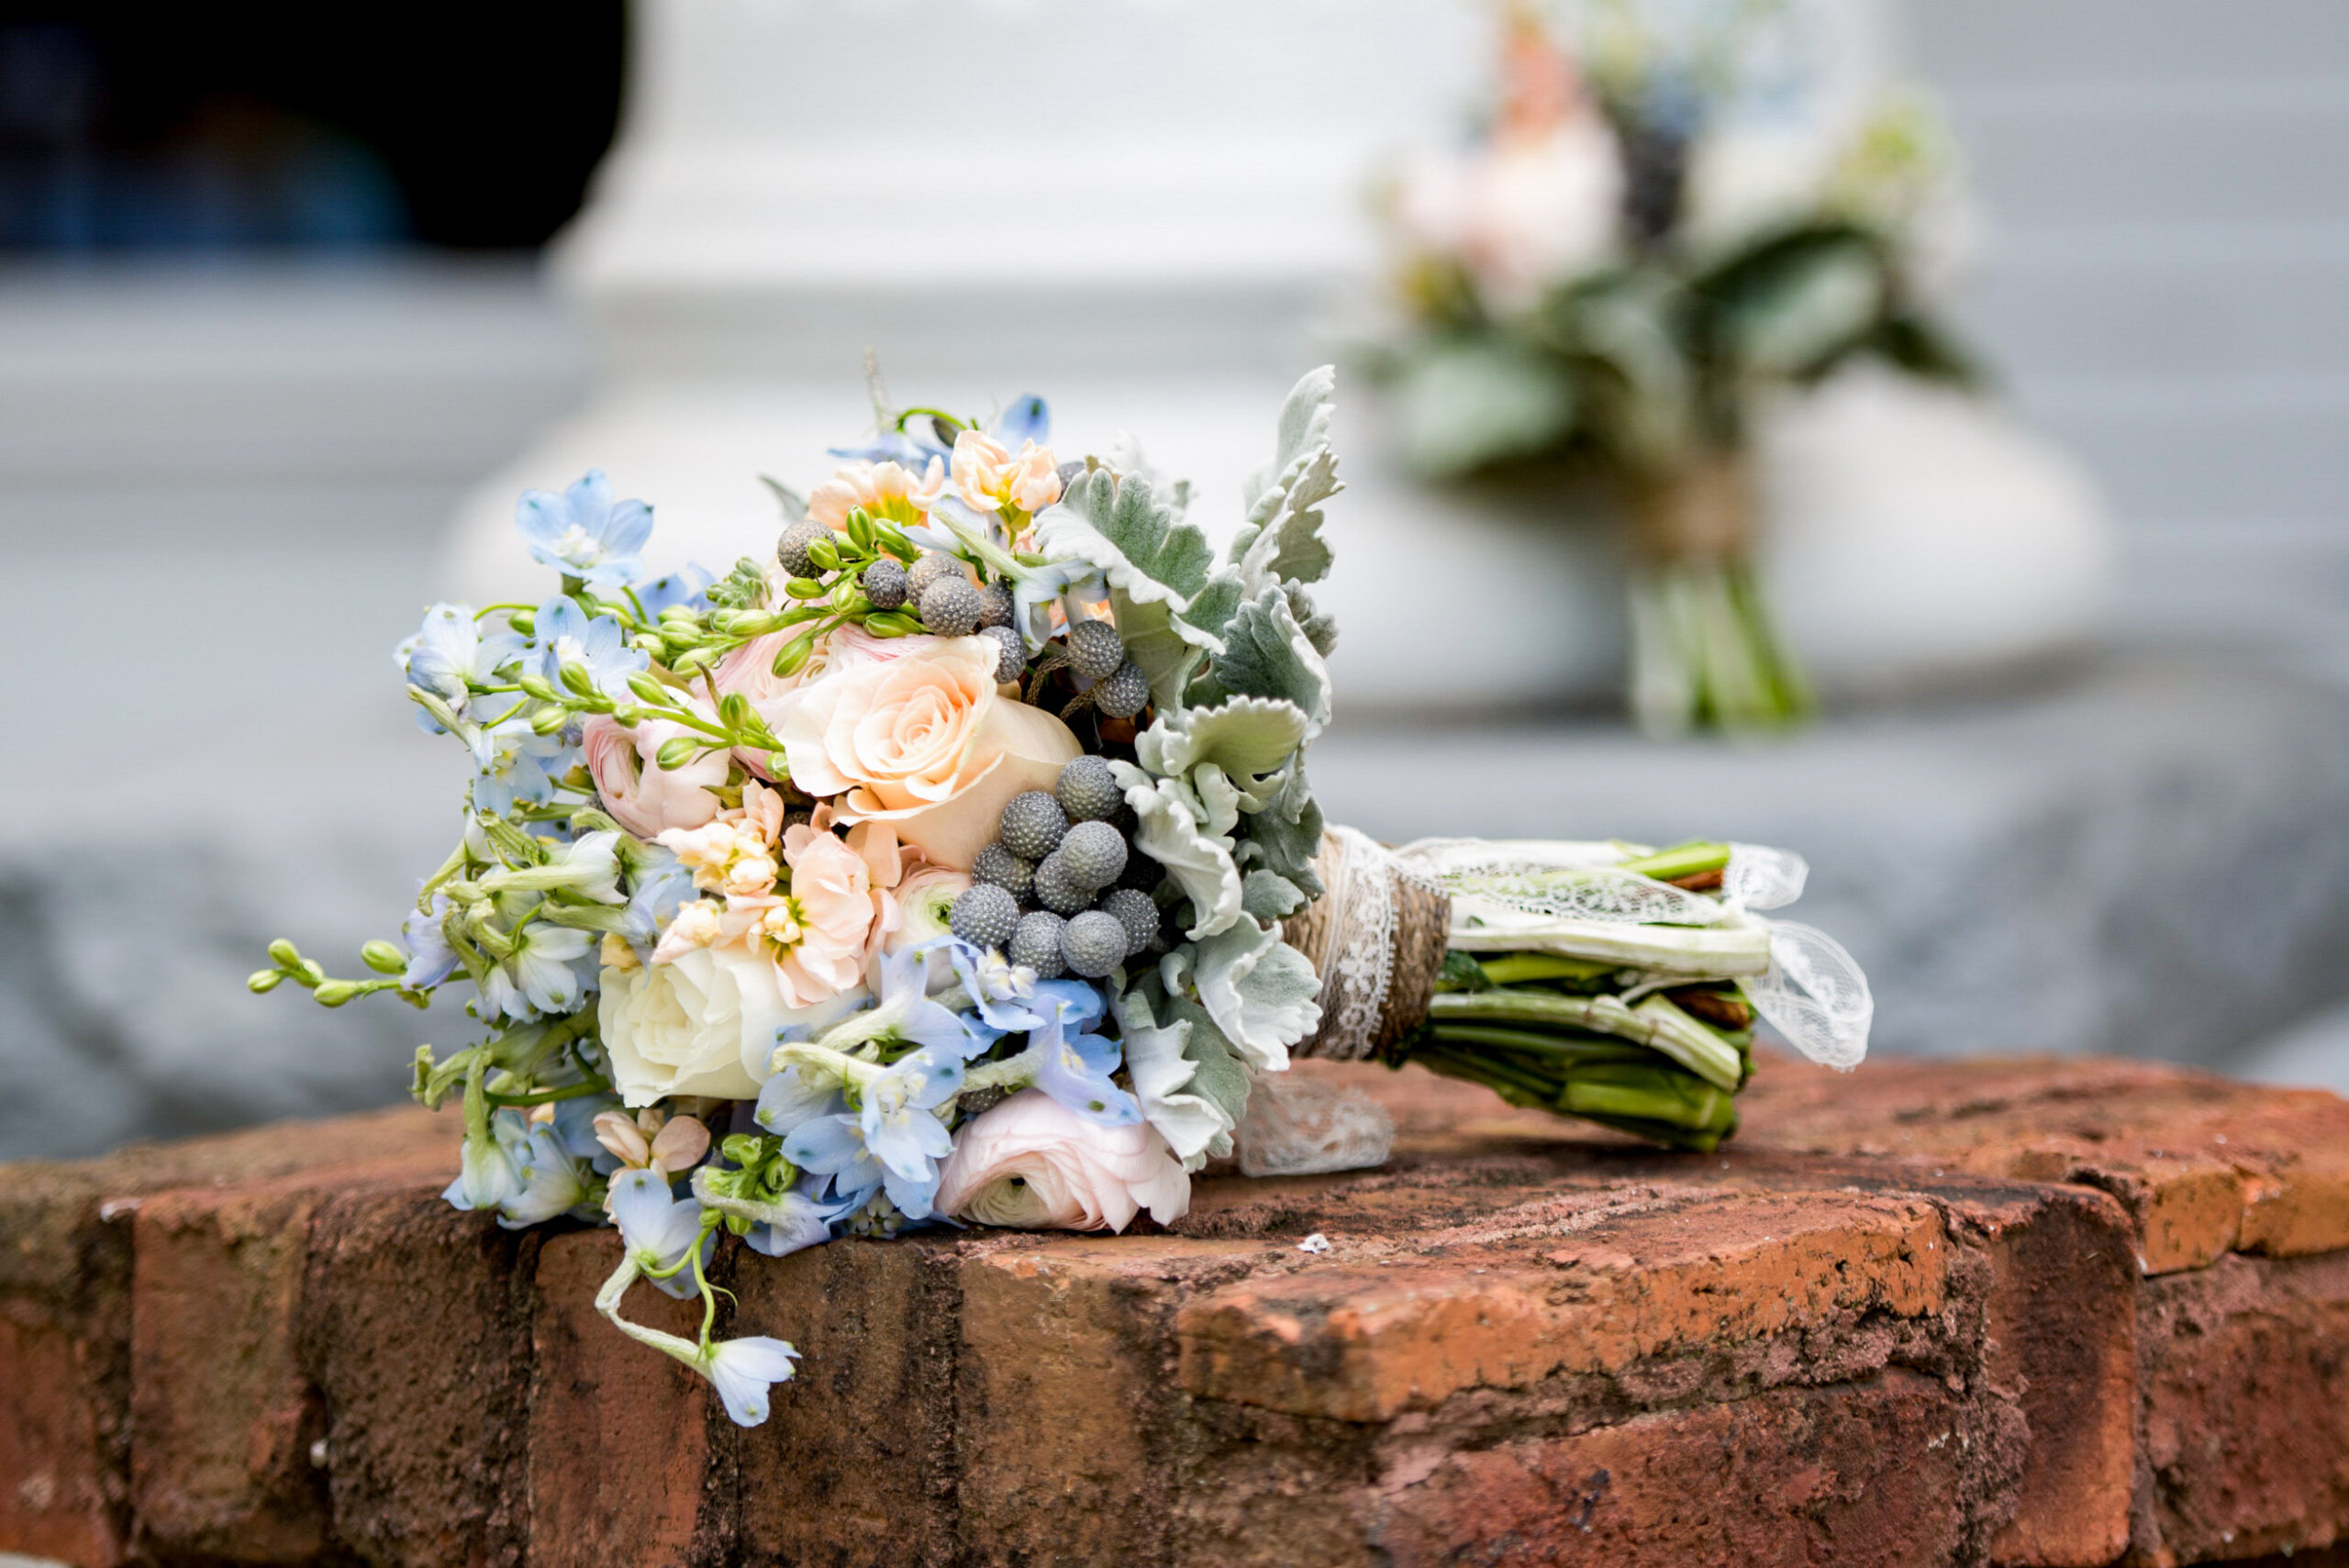 Sustainable Flower Bouquets: Eco-Friendly Options for Environmentally Conscious Consumers